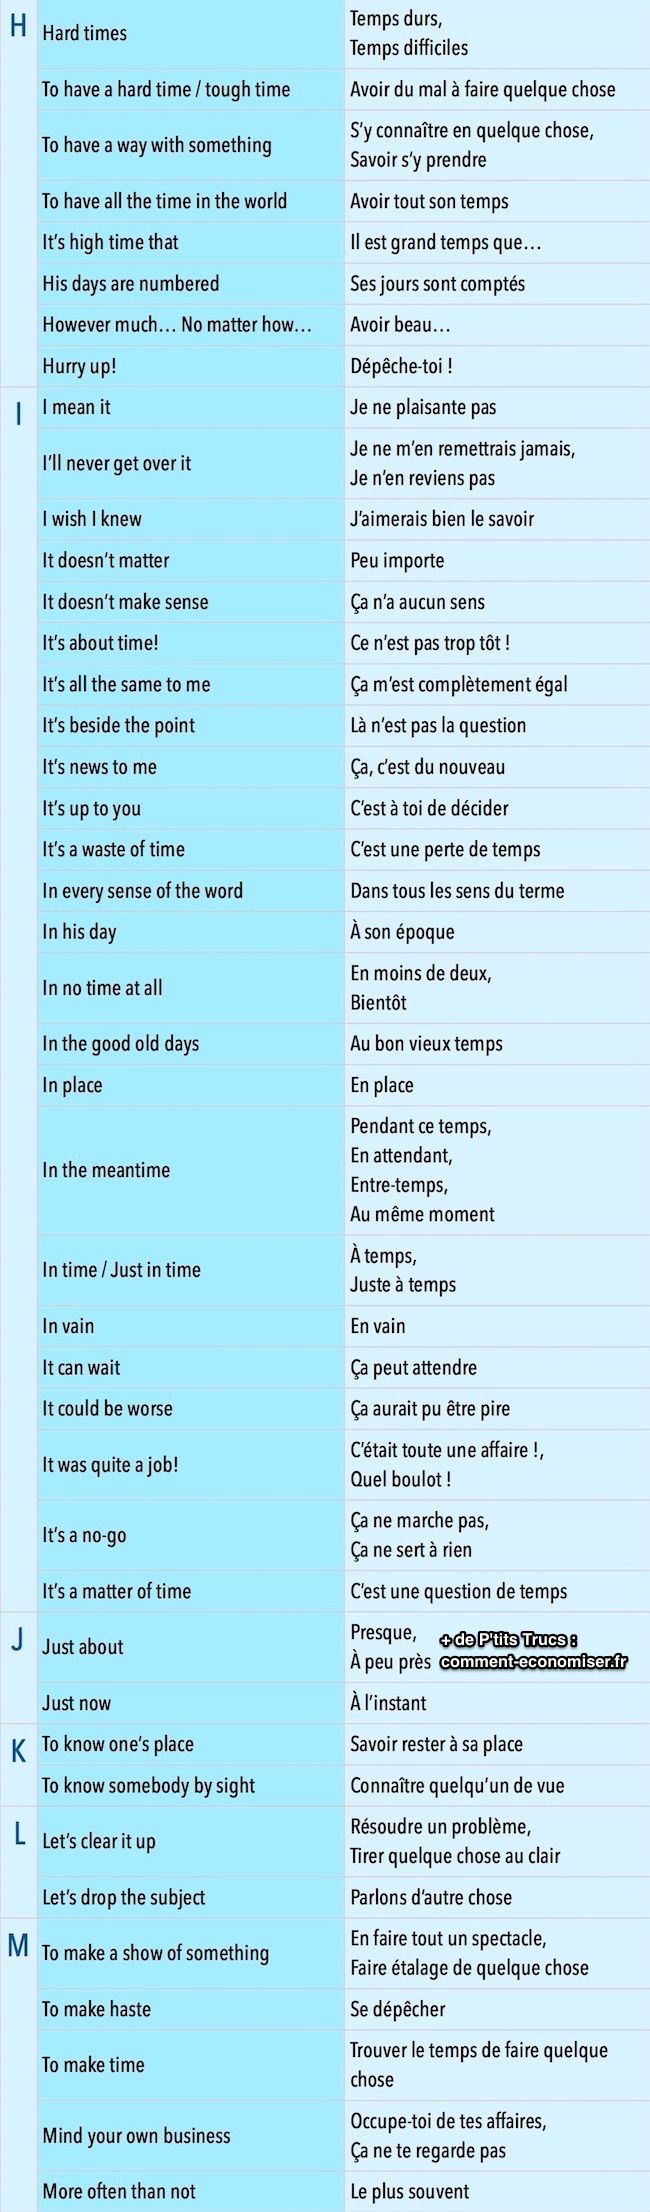 Following expressions in French and English to know